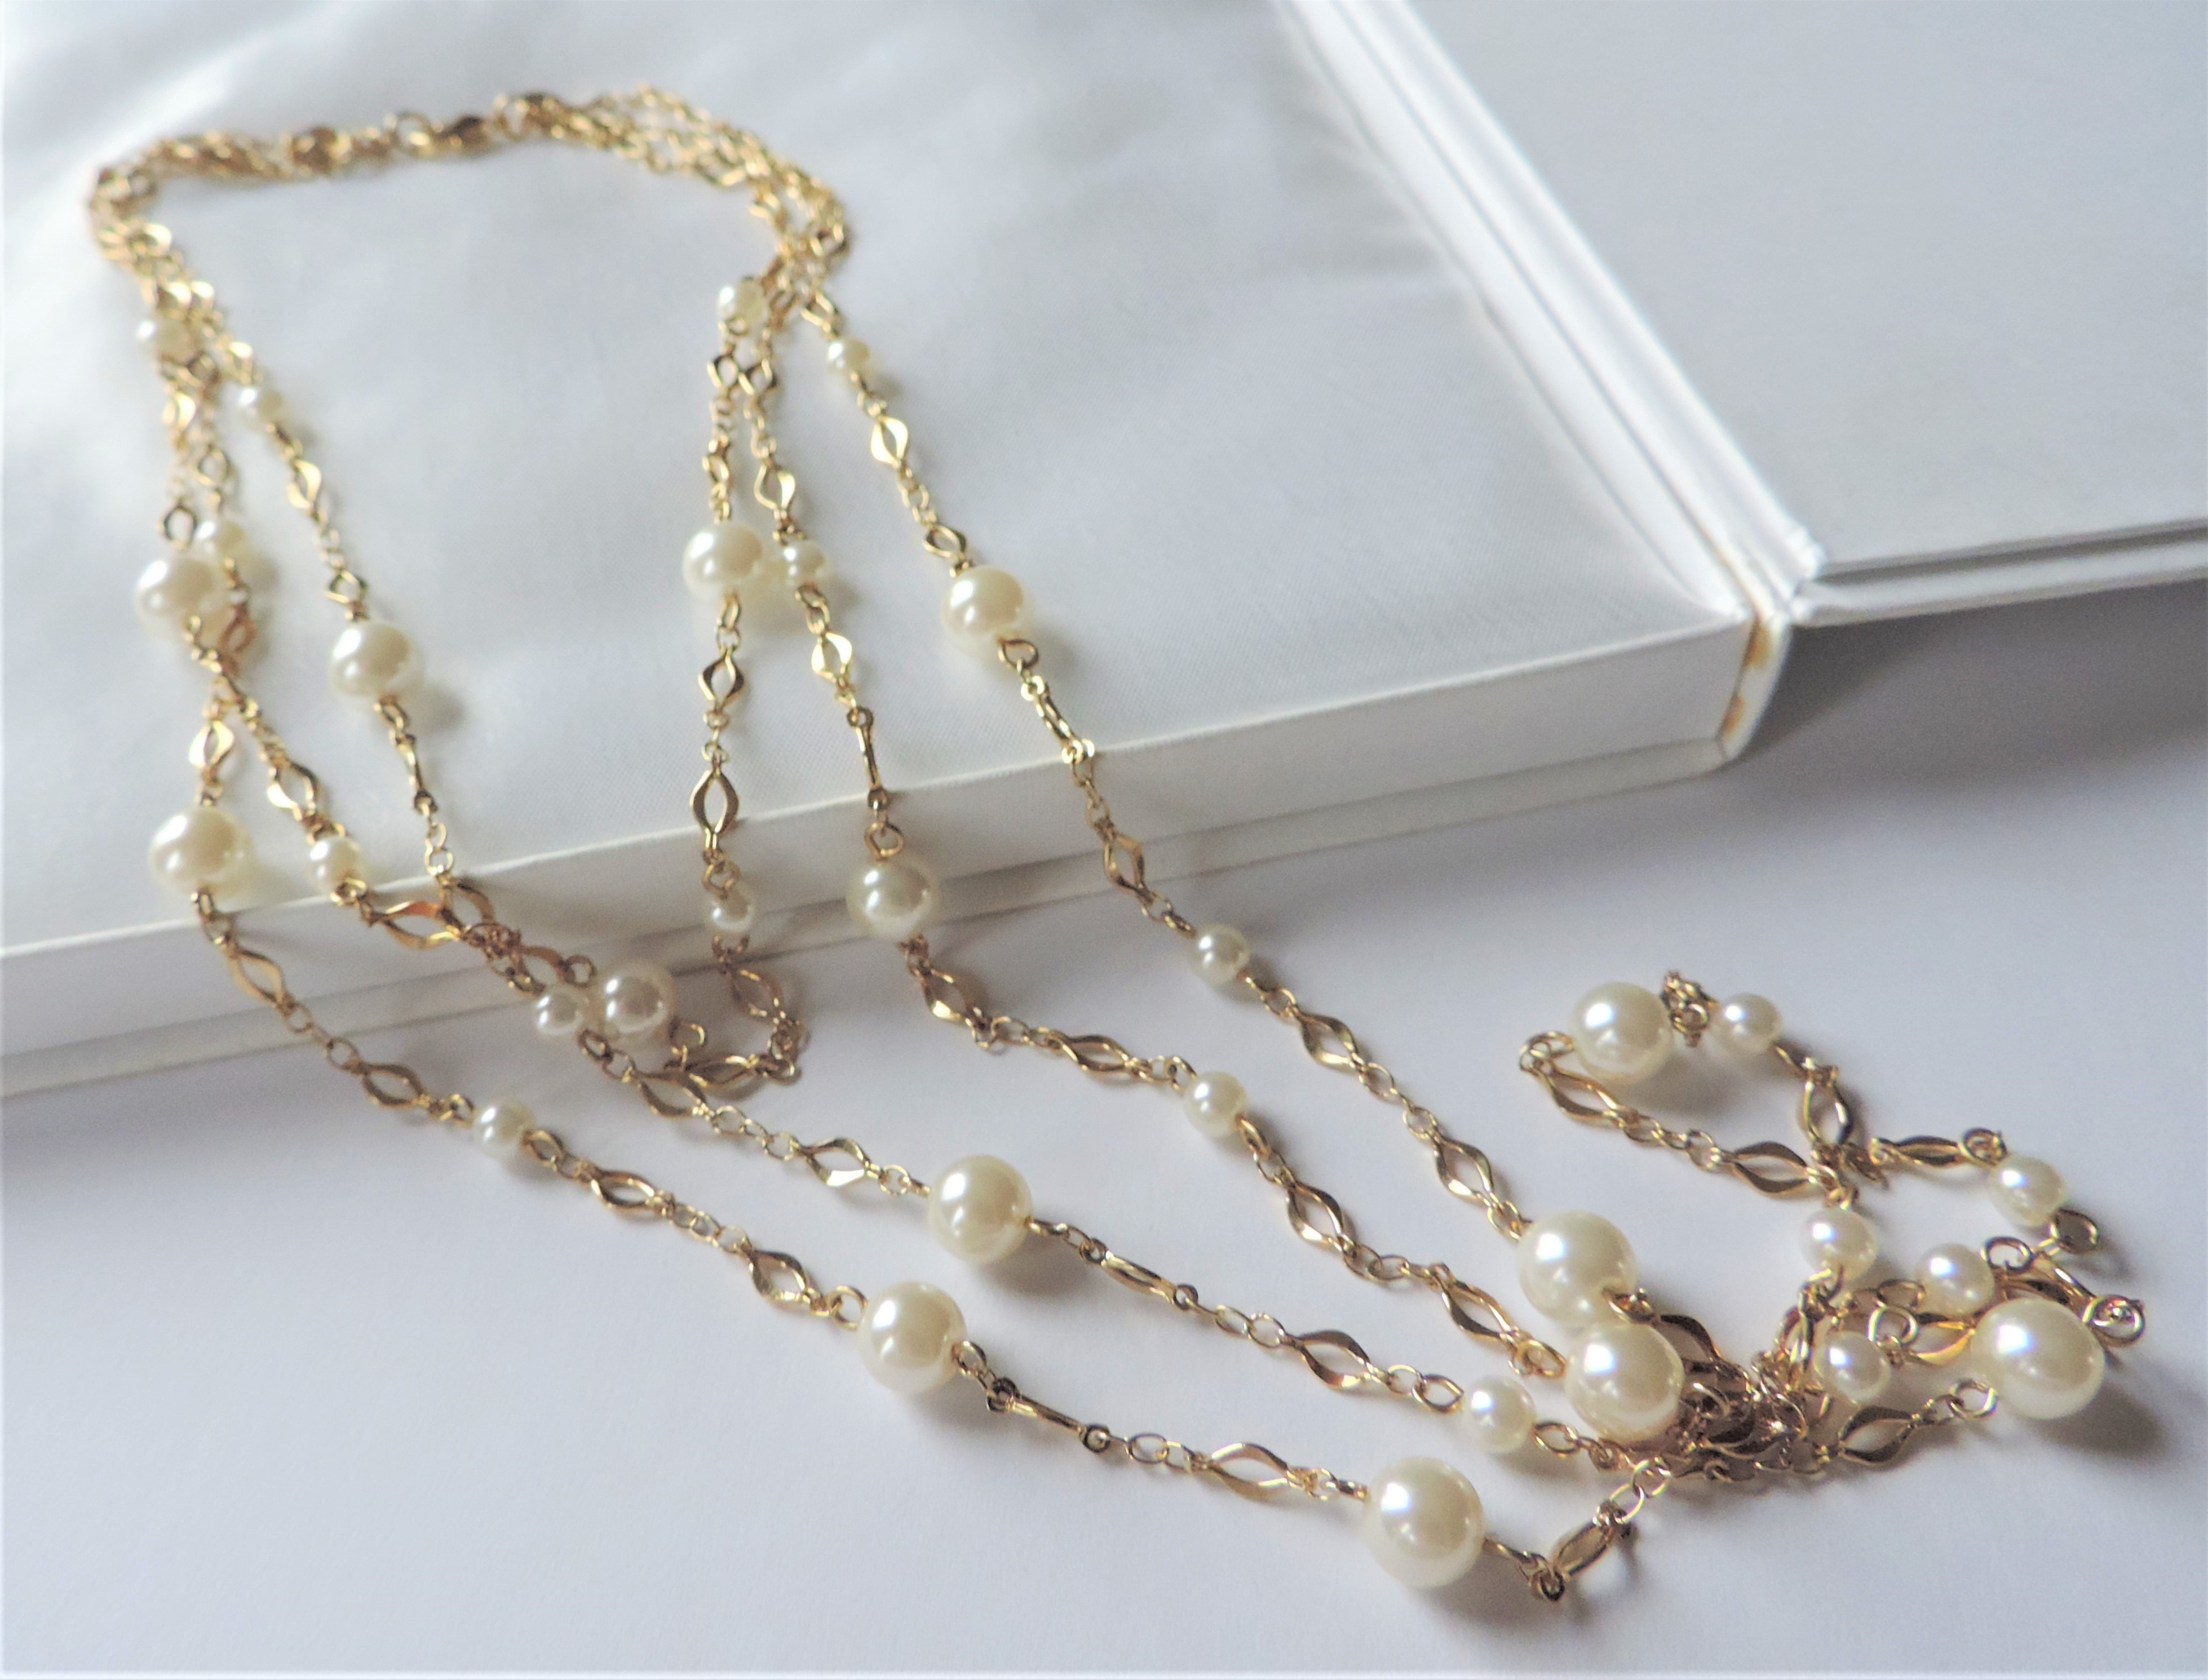 26 inch Triple Strand Gold Plated Chain Pearl Necklace with Gift Pouch - Image 3 of 3